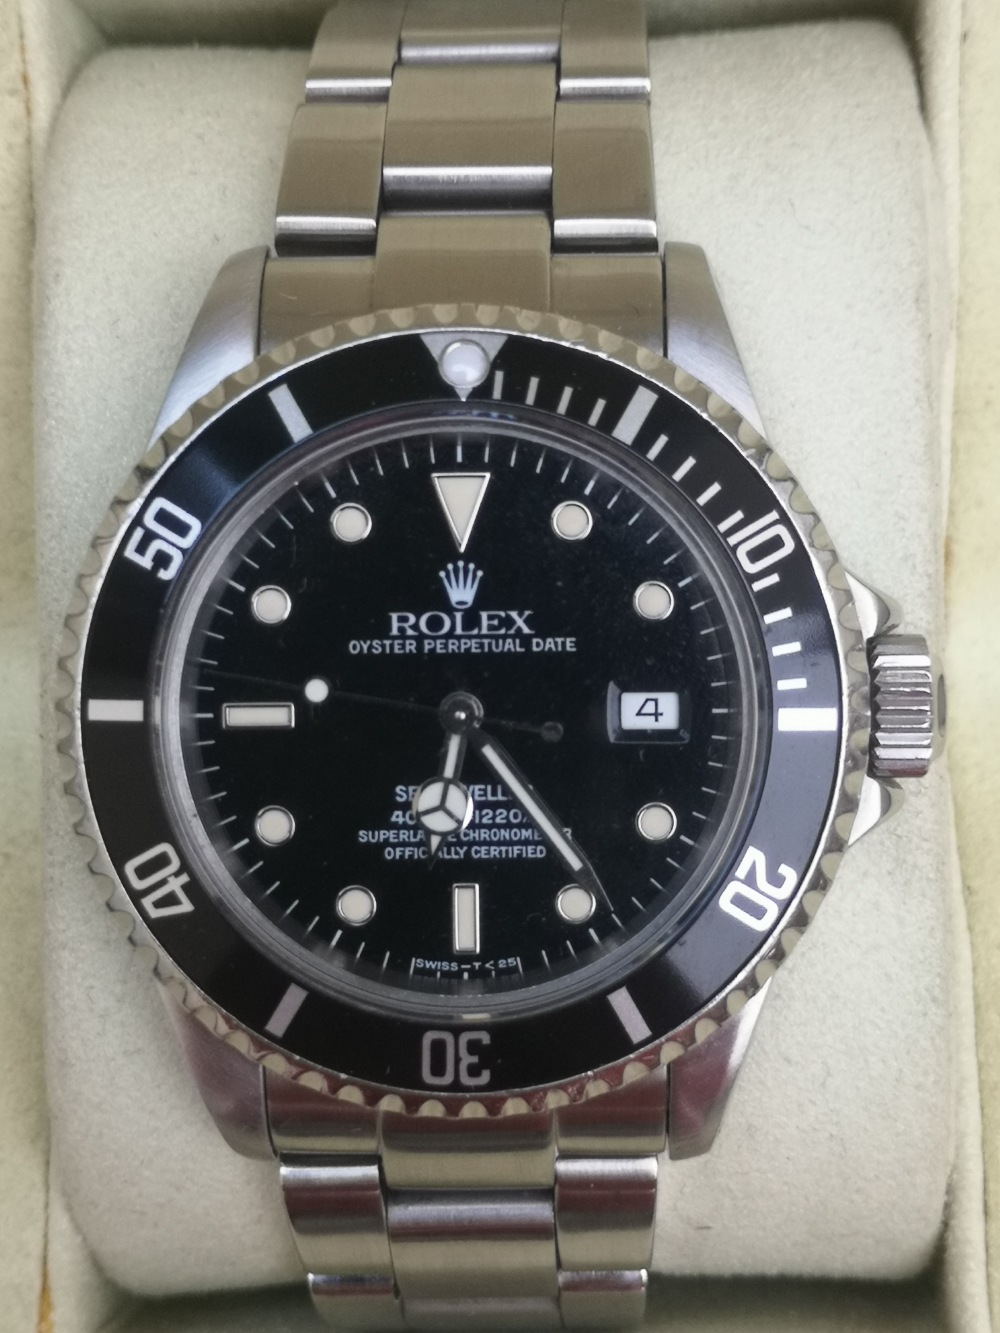 A boxed 1991 gent's stainless steel Rolex Oyster Perpetual Date Sea-Dweller automatic wrist watch